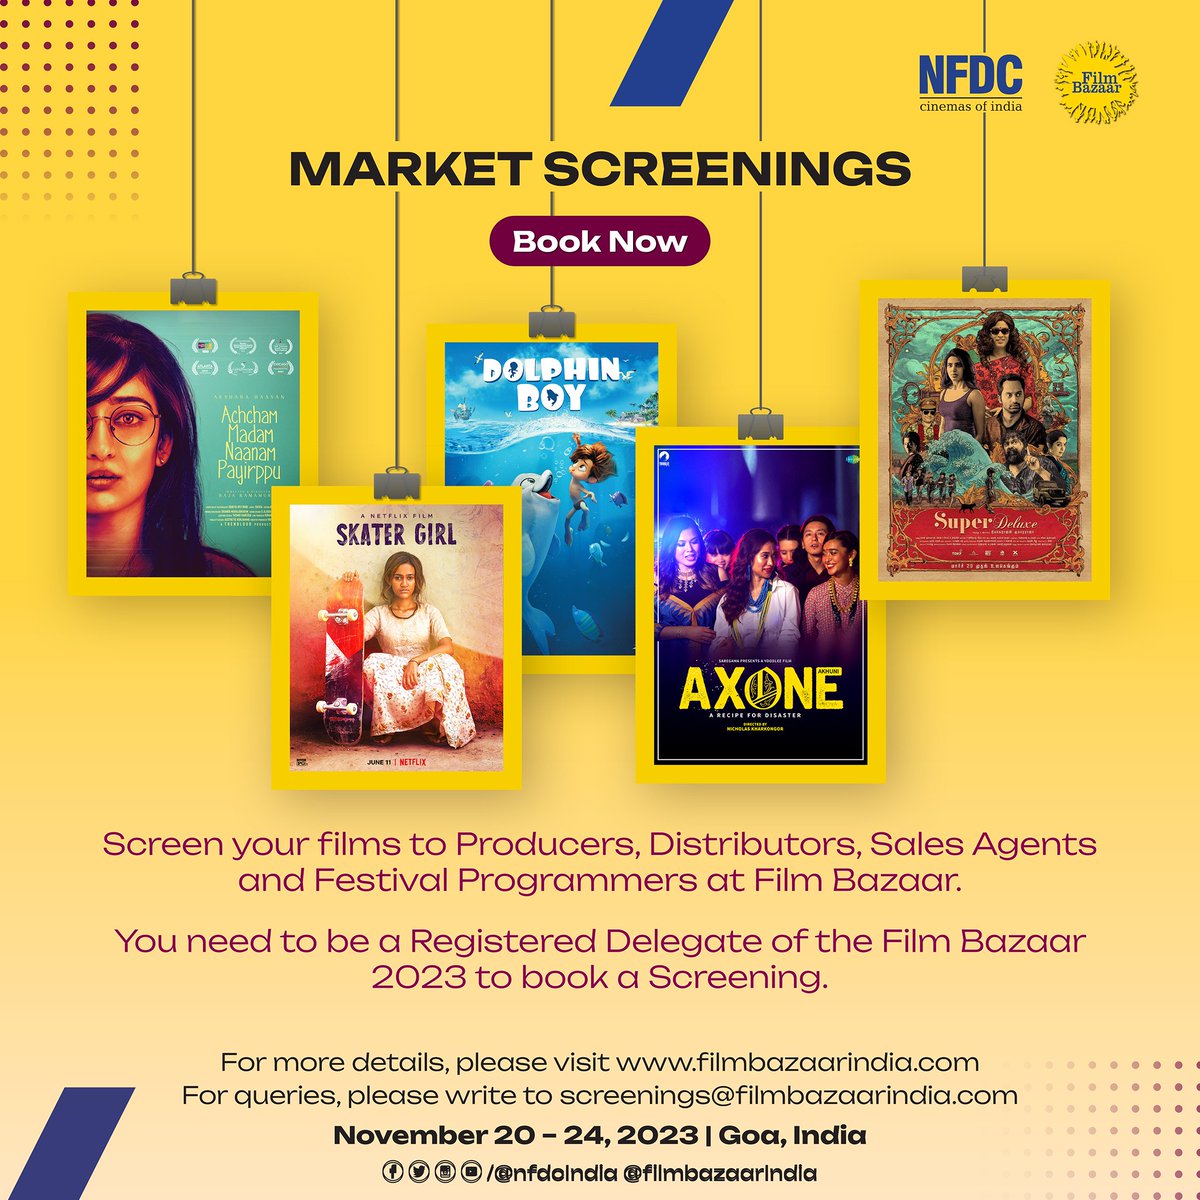 Time is running out for #MarketScreenings. Don't miss the chance to showcase your film to a global audience, including international distributors, aggregators, producers, and film festival programmers. For details visit filmbazaarindia.com #NFDC #FilmBazaarIndia #FilmMarket